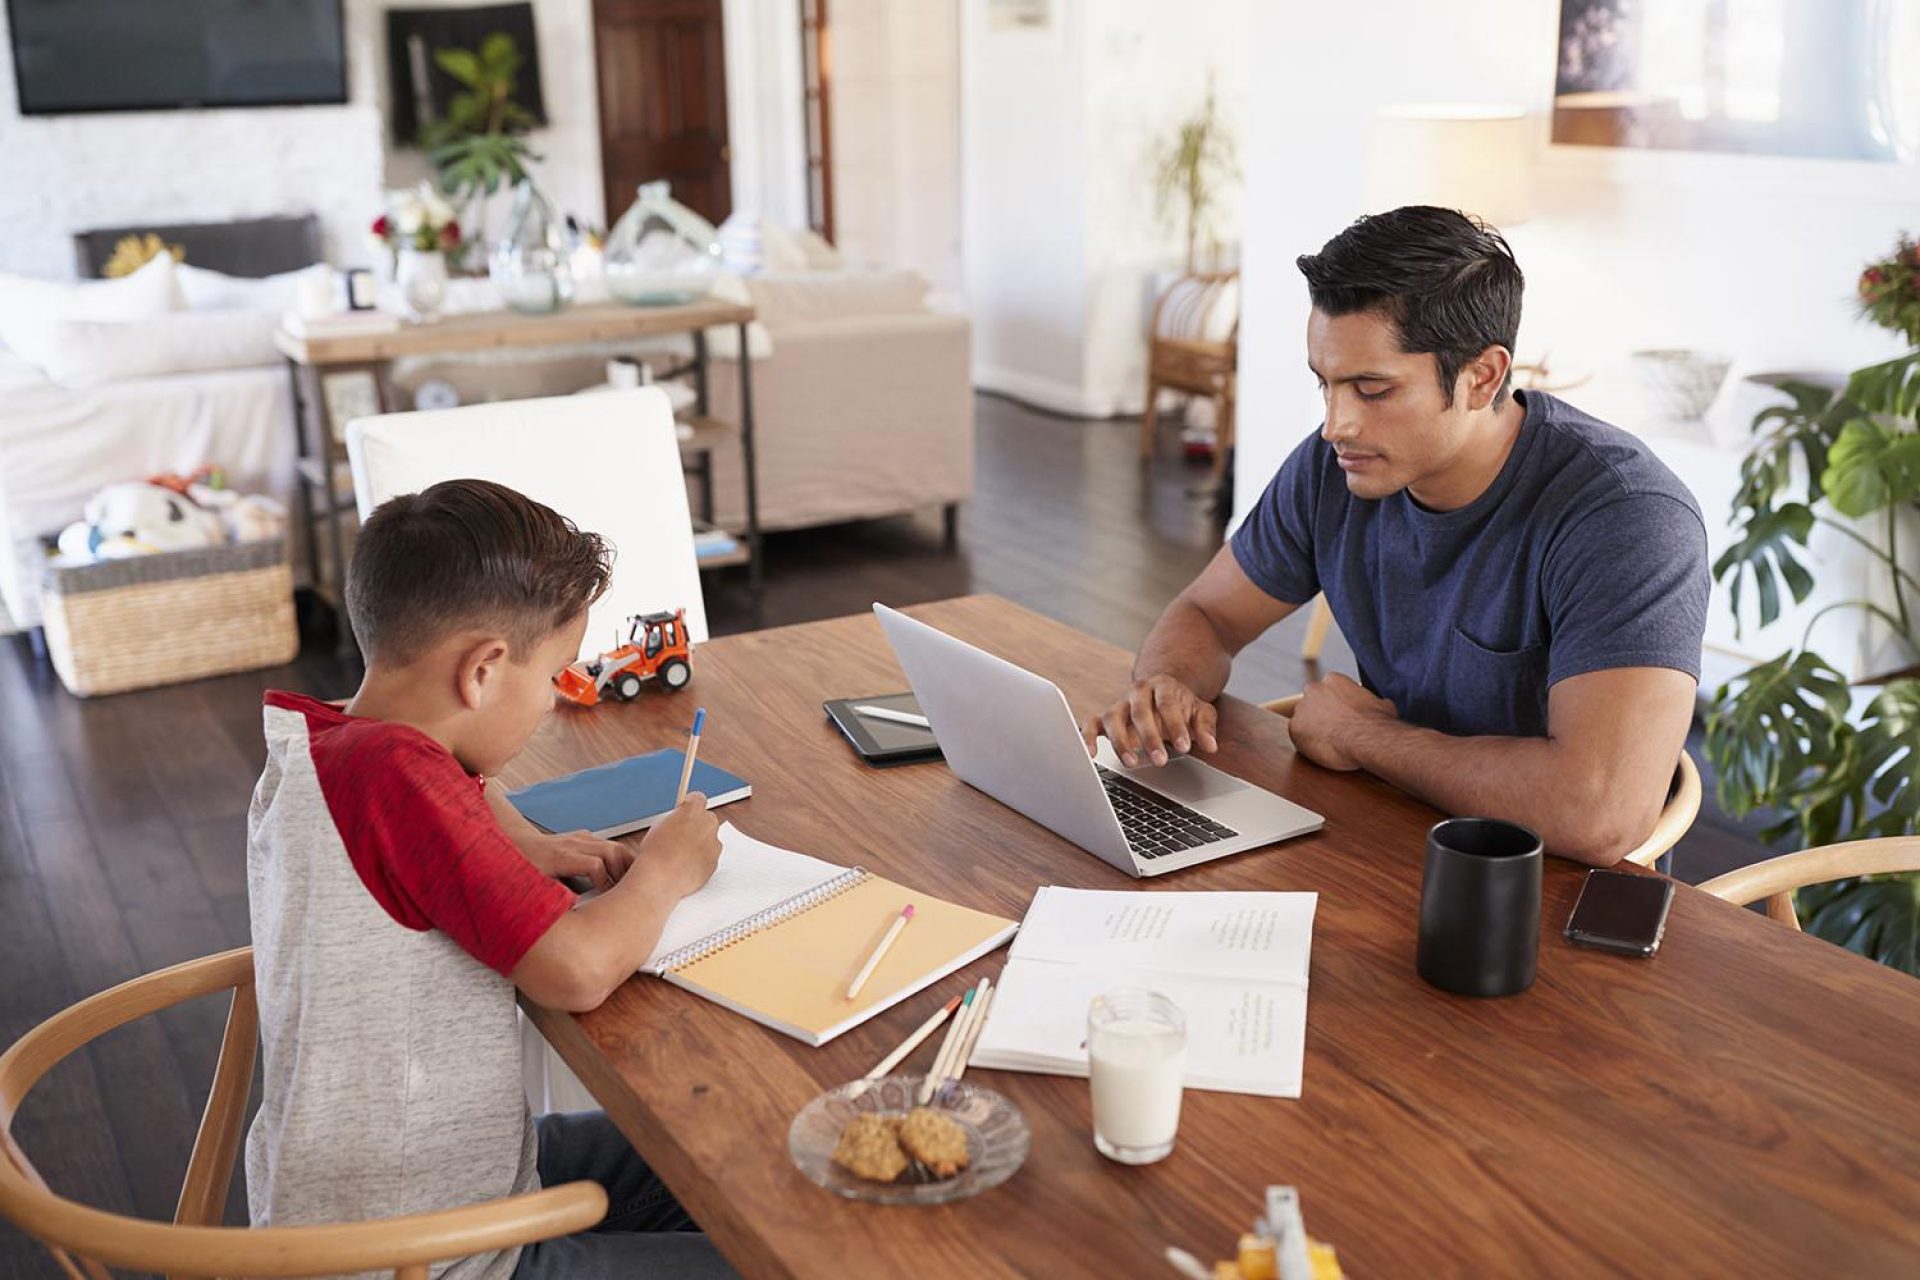 Hispanic father and son working opposite each other at the dining room table, elevated view